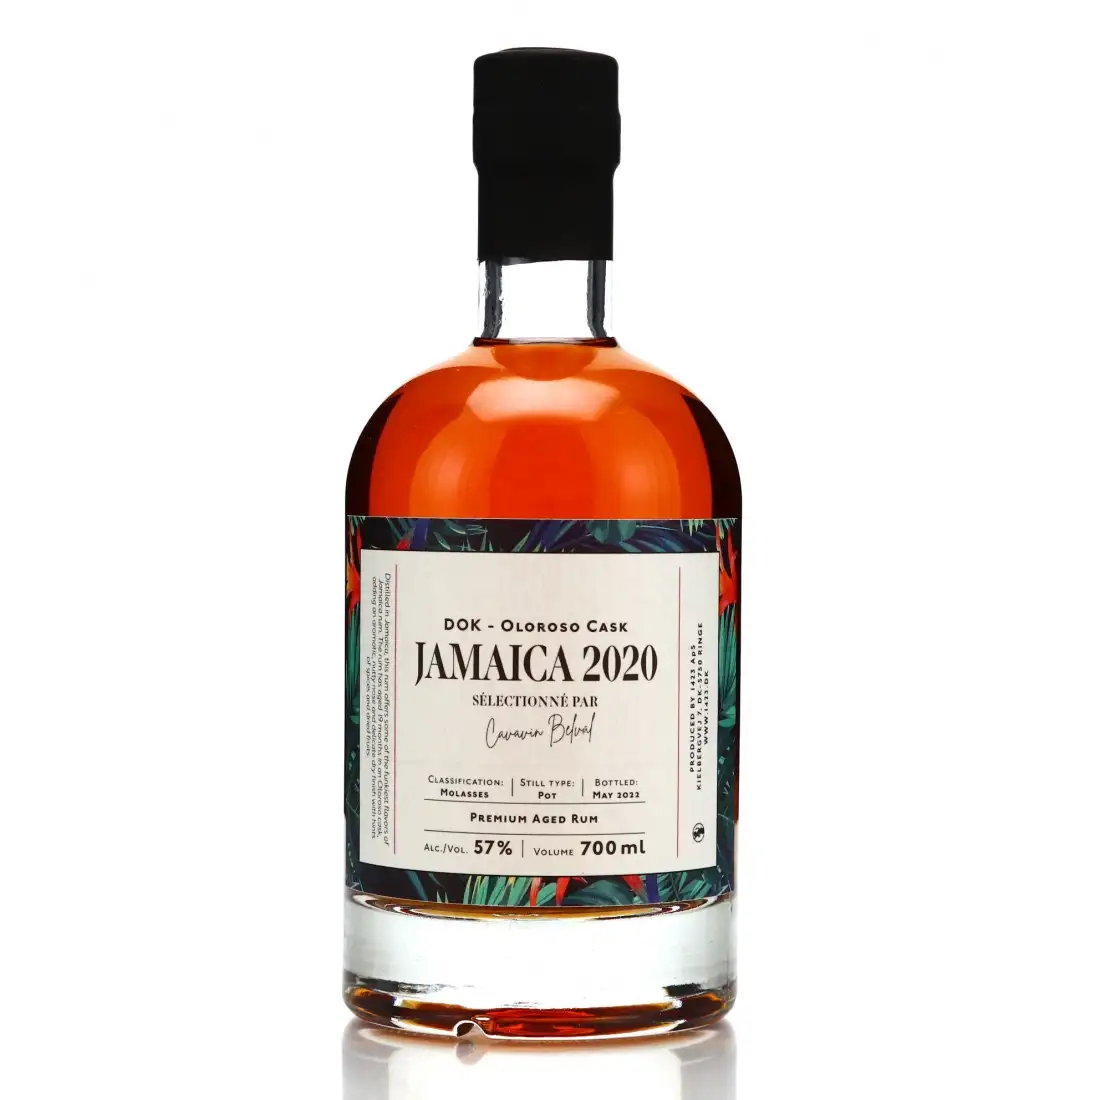 Image of the front of the bottle of the rum Jamaica 2020 DOK - Oloroso Cask (Cavavin Belval) DOK